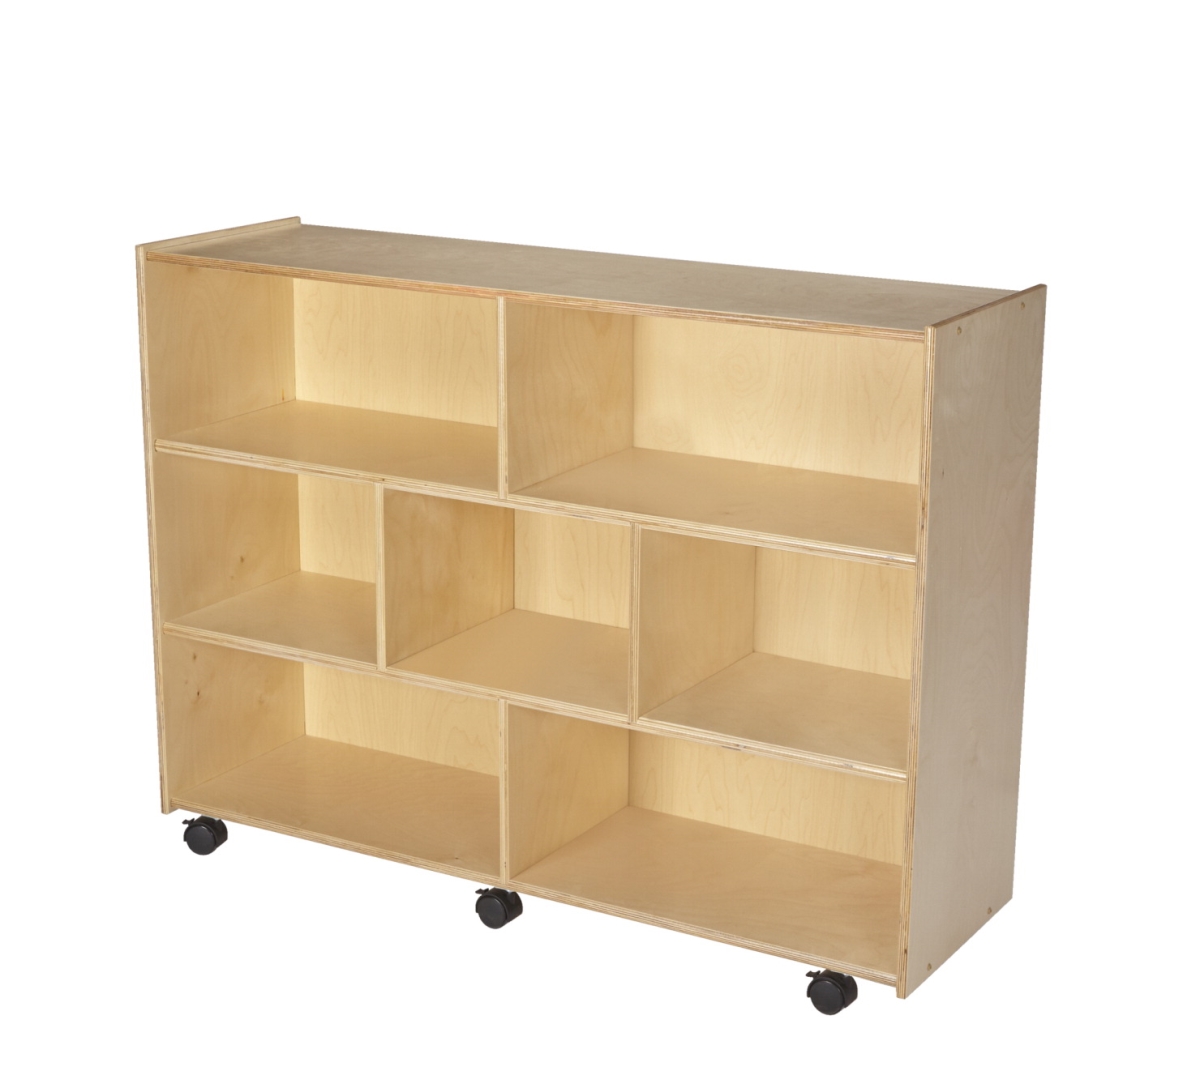 1558441 47.75 X 14.25 X 36 In. Mobile Compartment Storage Units With Locking Casters